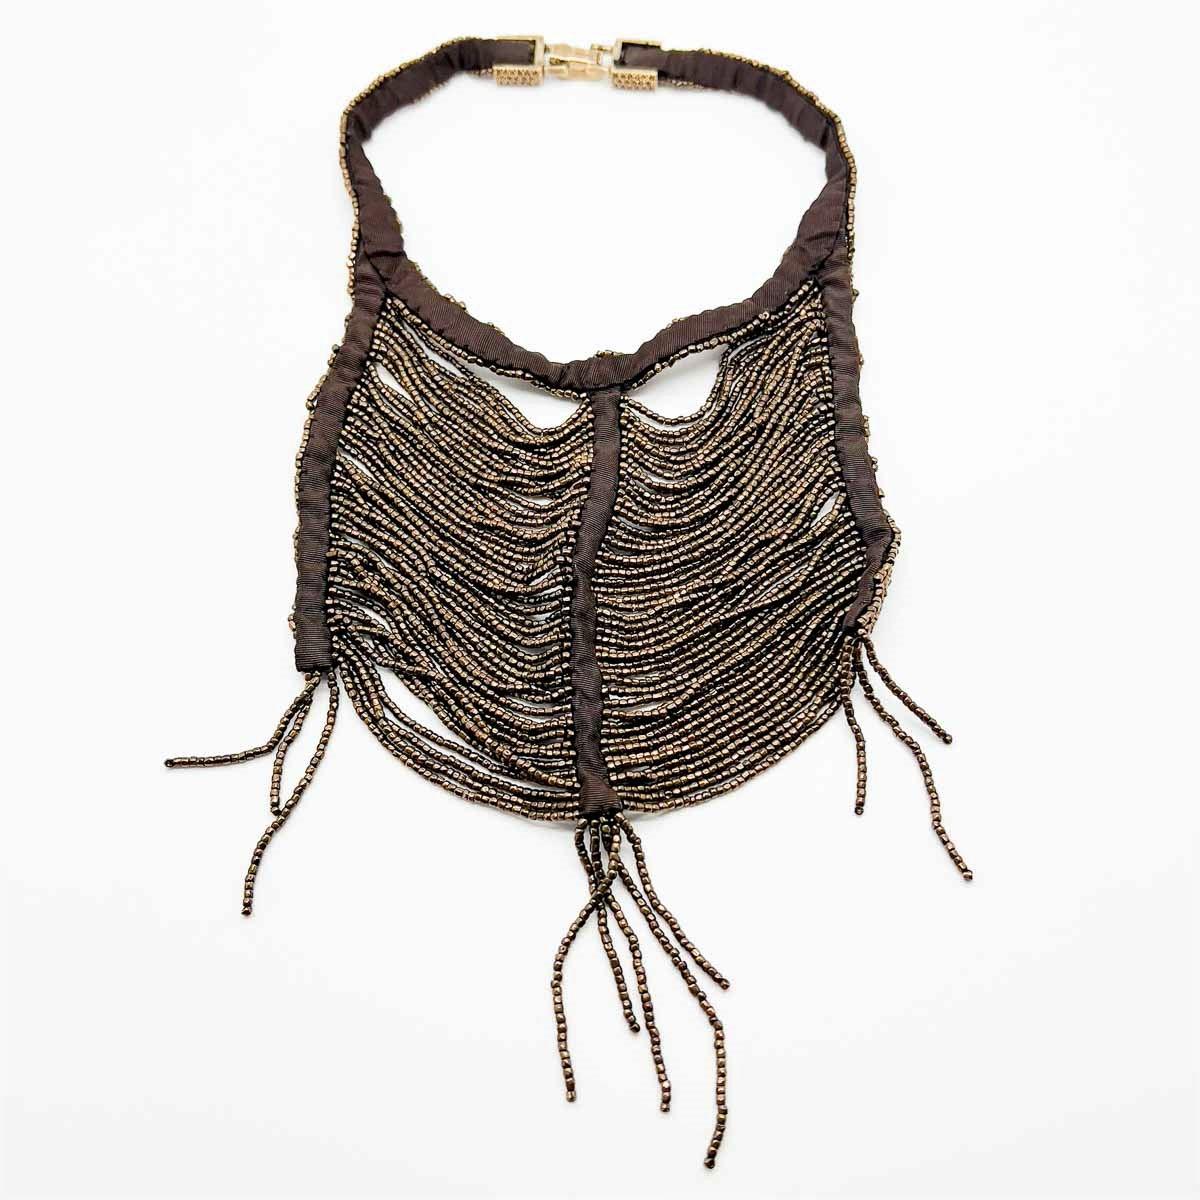 Christian Dior by Galliano Masai Inspired Bronzed Bib Necklace 1990s For Sale 1